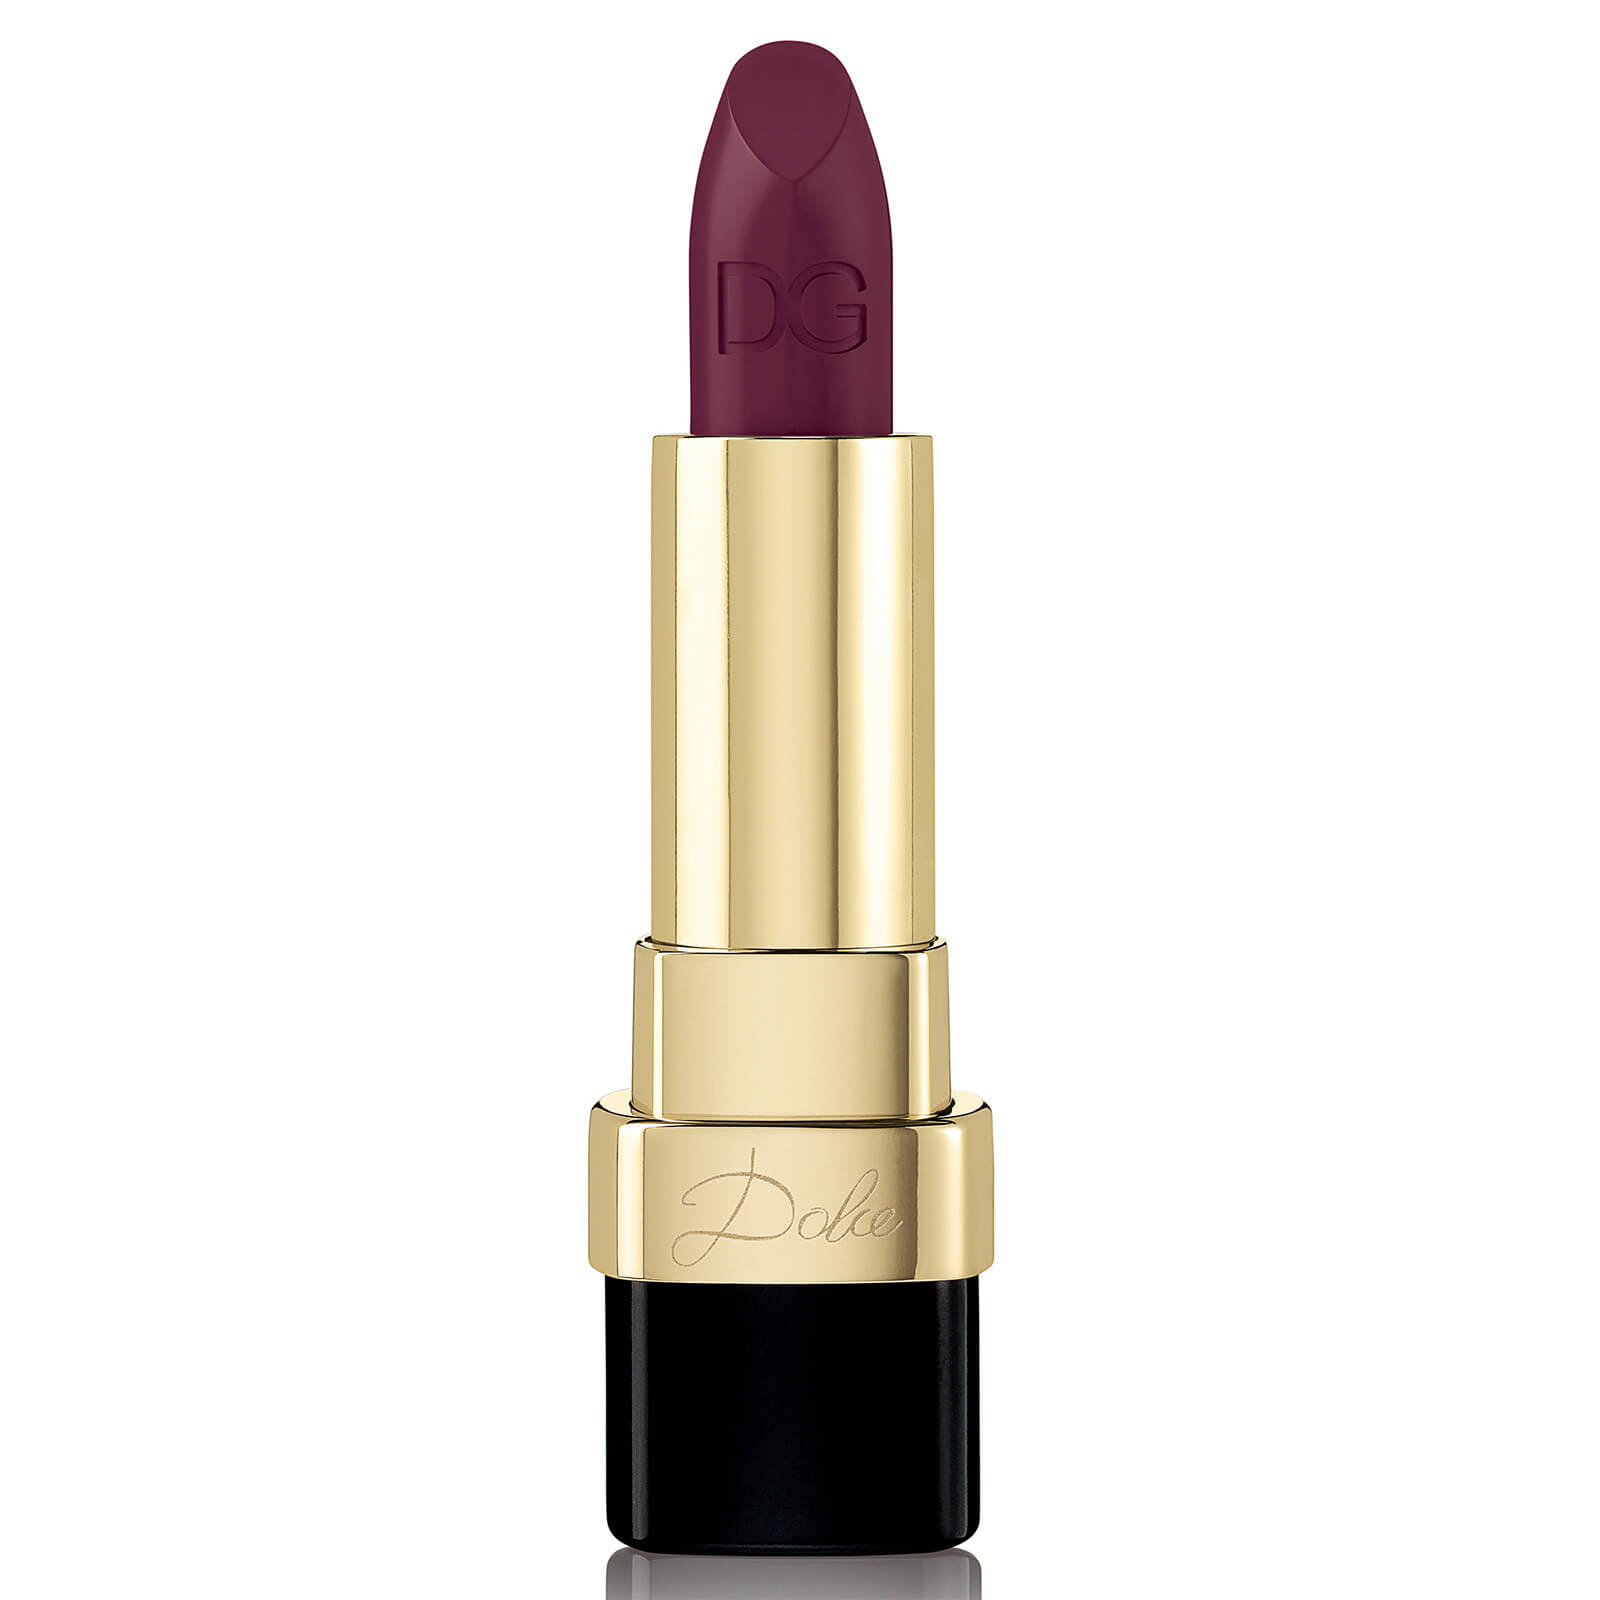 Dolce&Gabbana Dolce Matte Lipstick 3.5g (Various Shades) - 322 Dolce Magnetic